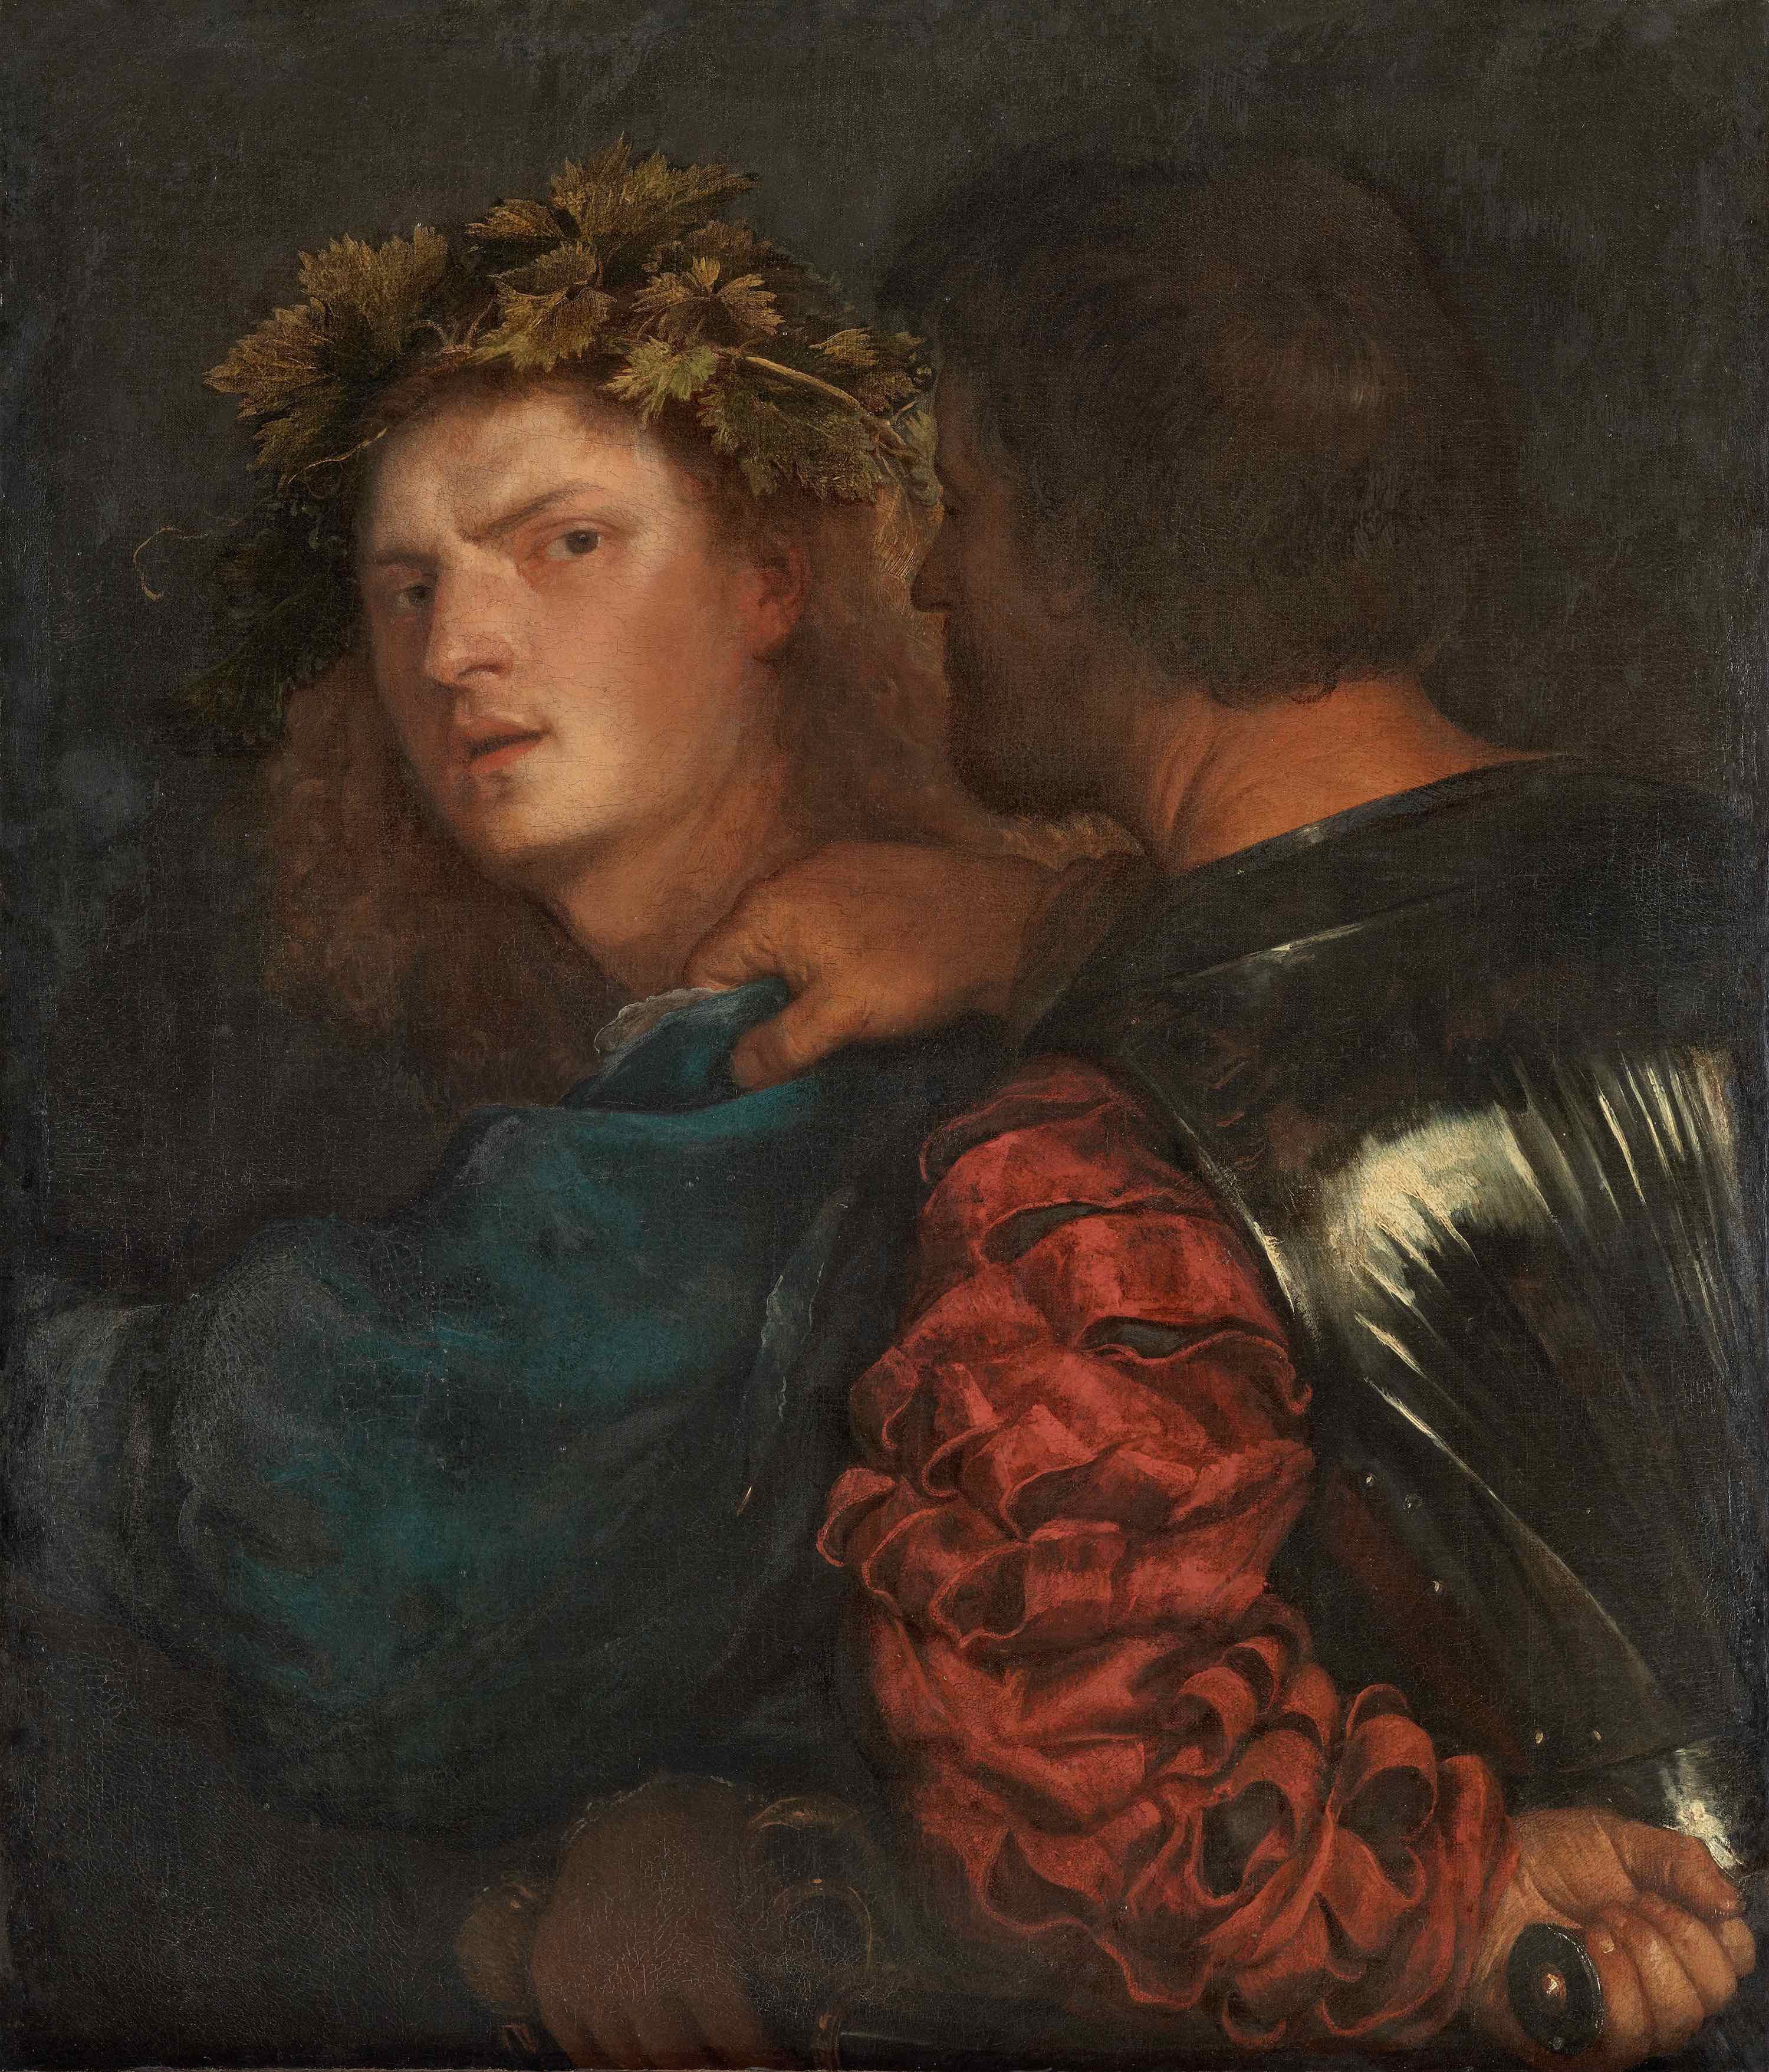 O Bravo by  Titian - c. 1520 Kunsthistorisches Museum